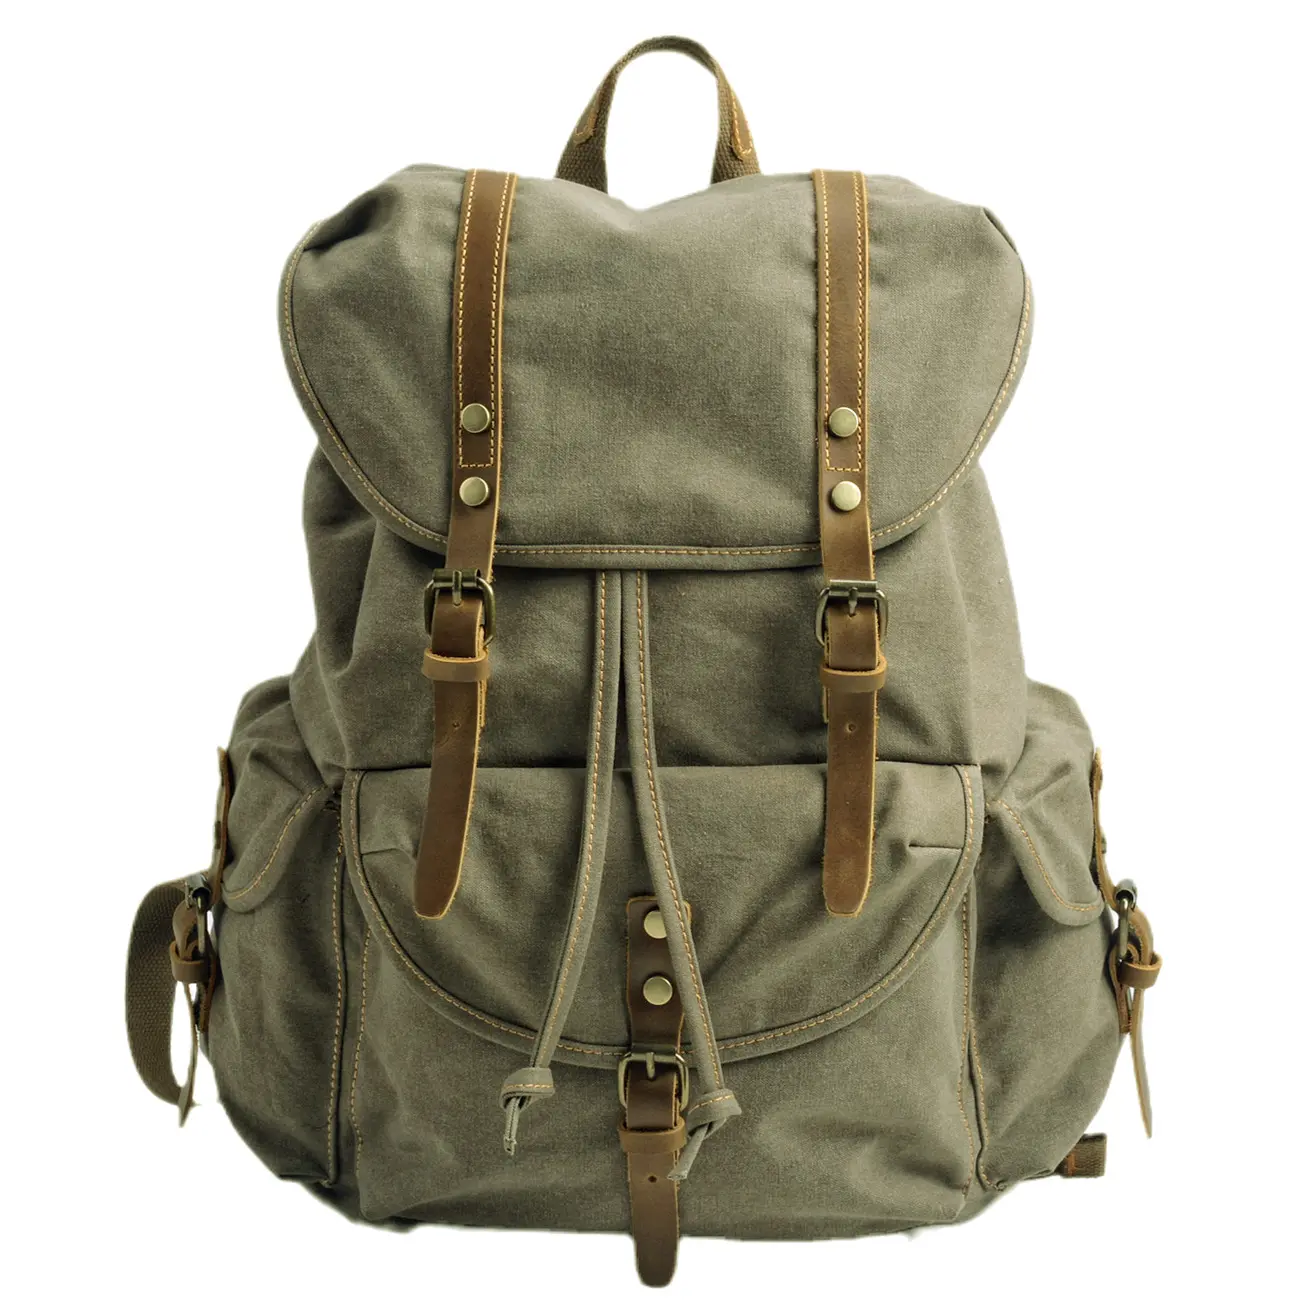 New casual backpack outdoor retro mountaineering backpack notebook bag student schoolbag canvas large capacity backpack